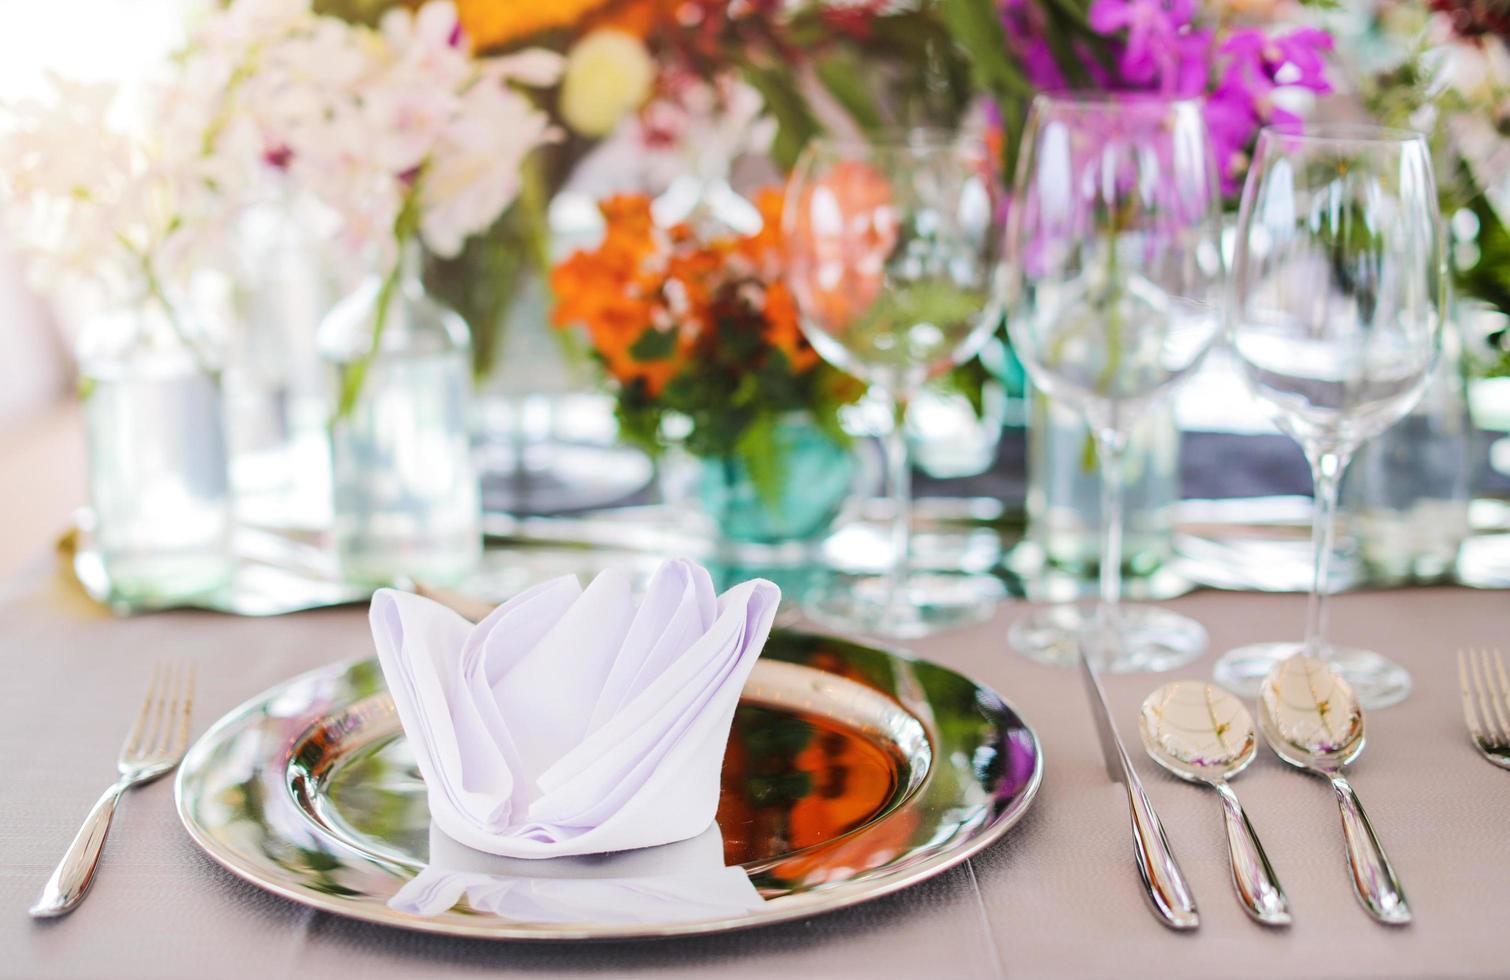 Table setting for a wedding or dinner event, with flowers photo